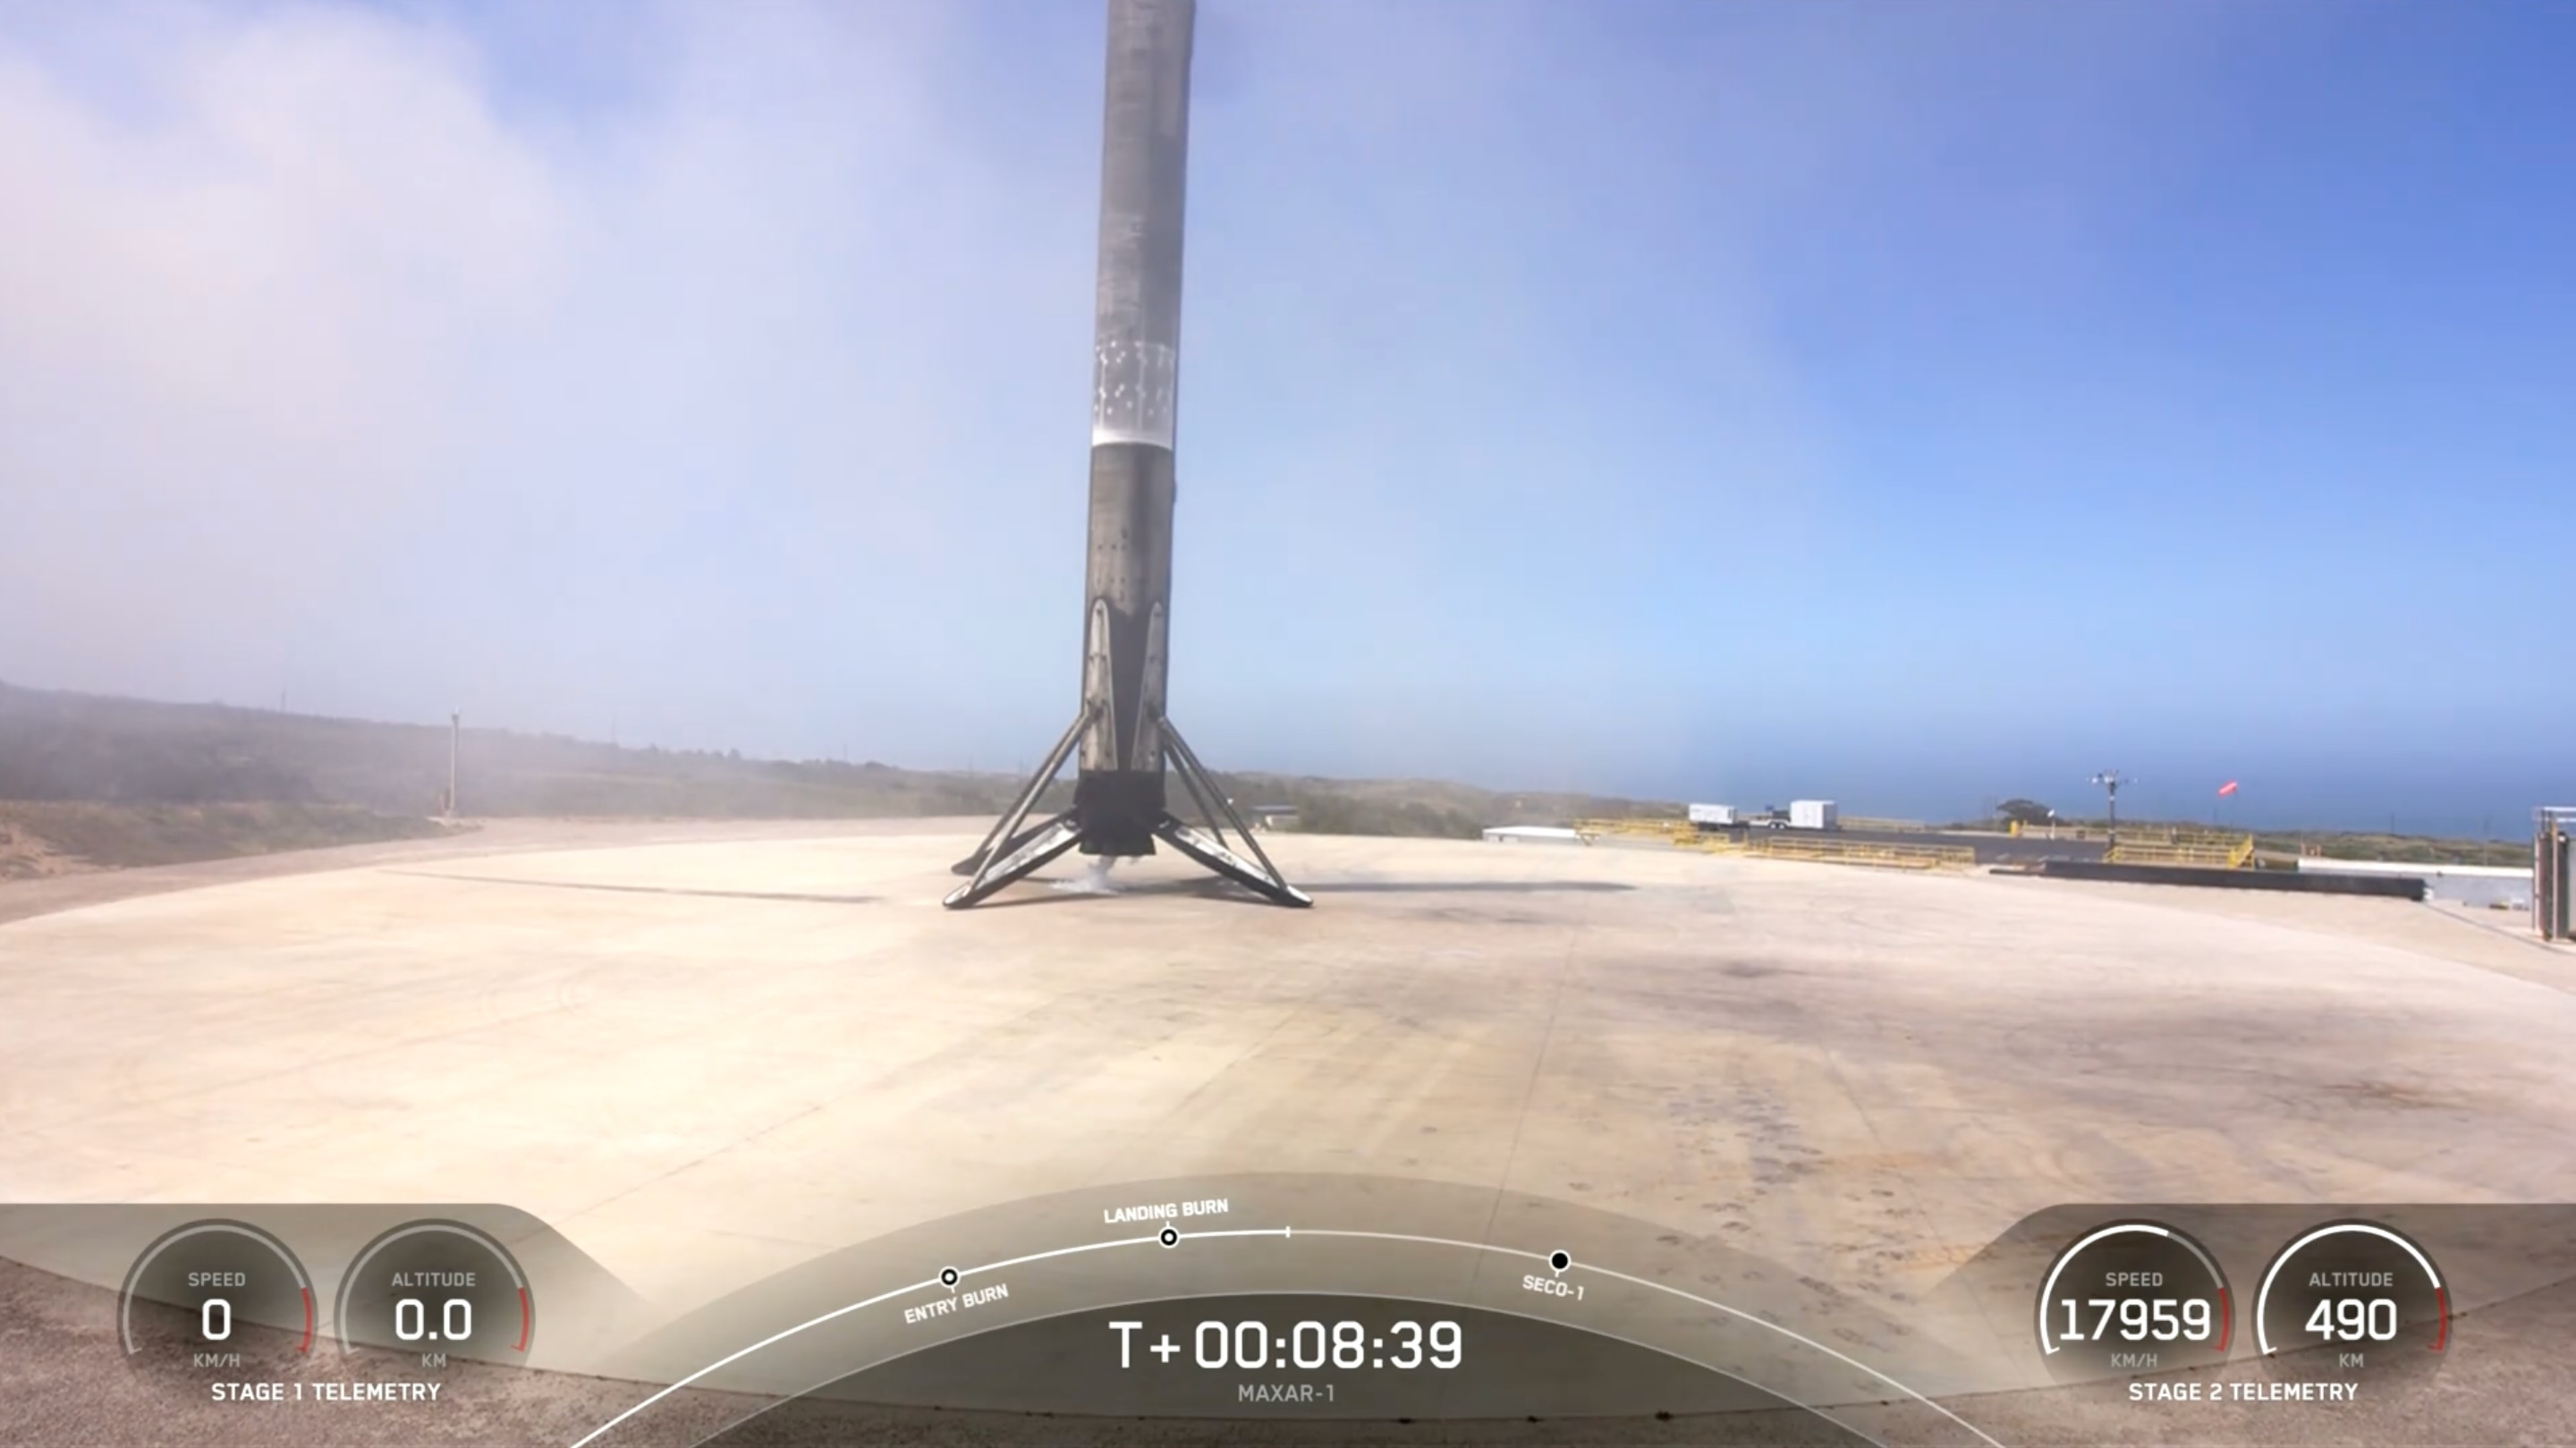 The first stage of a black-and-white SpaceX Falcon 9 rocket is placed on the landing pad shortly after landing.